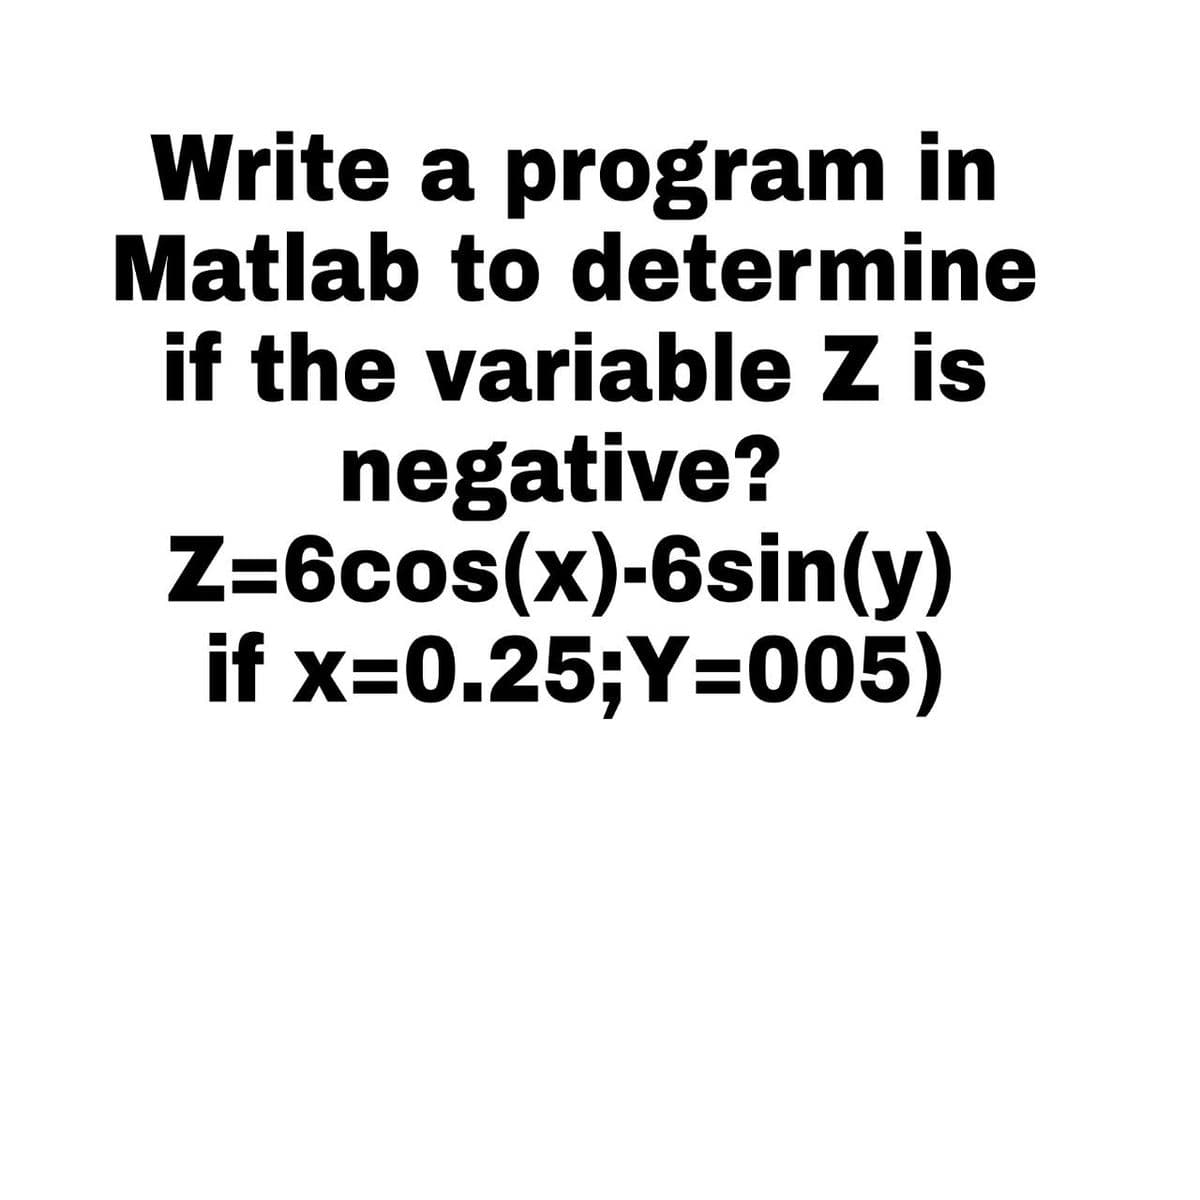 Write a program in
Matlab to determine
if the variable Z is
negative?
Z=6cos(x)-6sin(y)
if x=0.25;Y=005)
